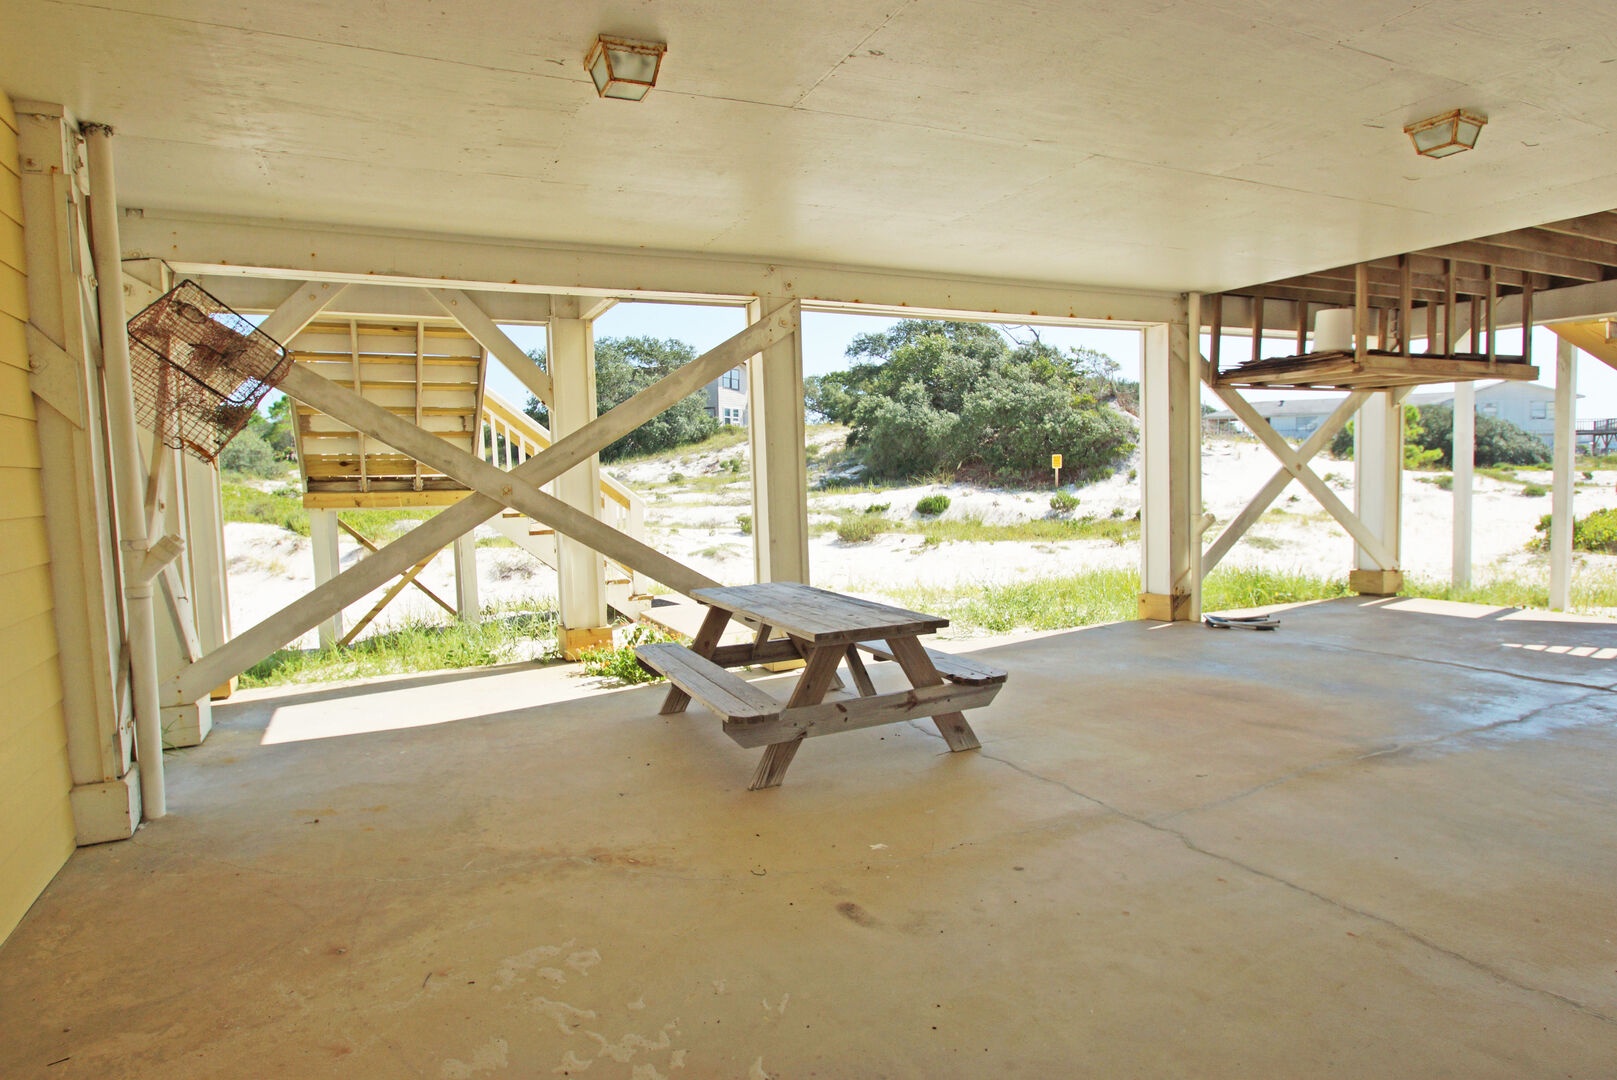 Covered picnic area under house